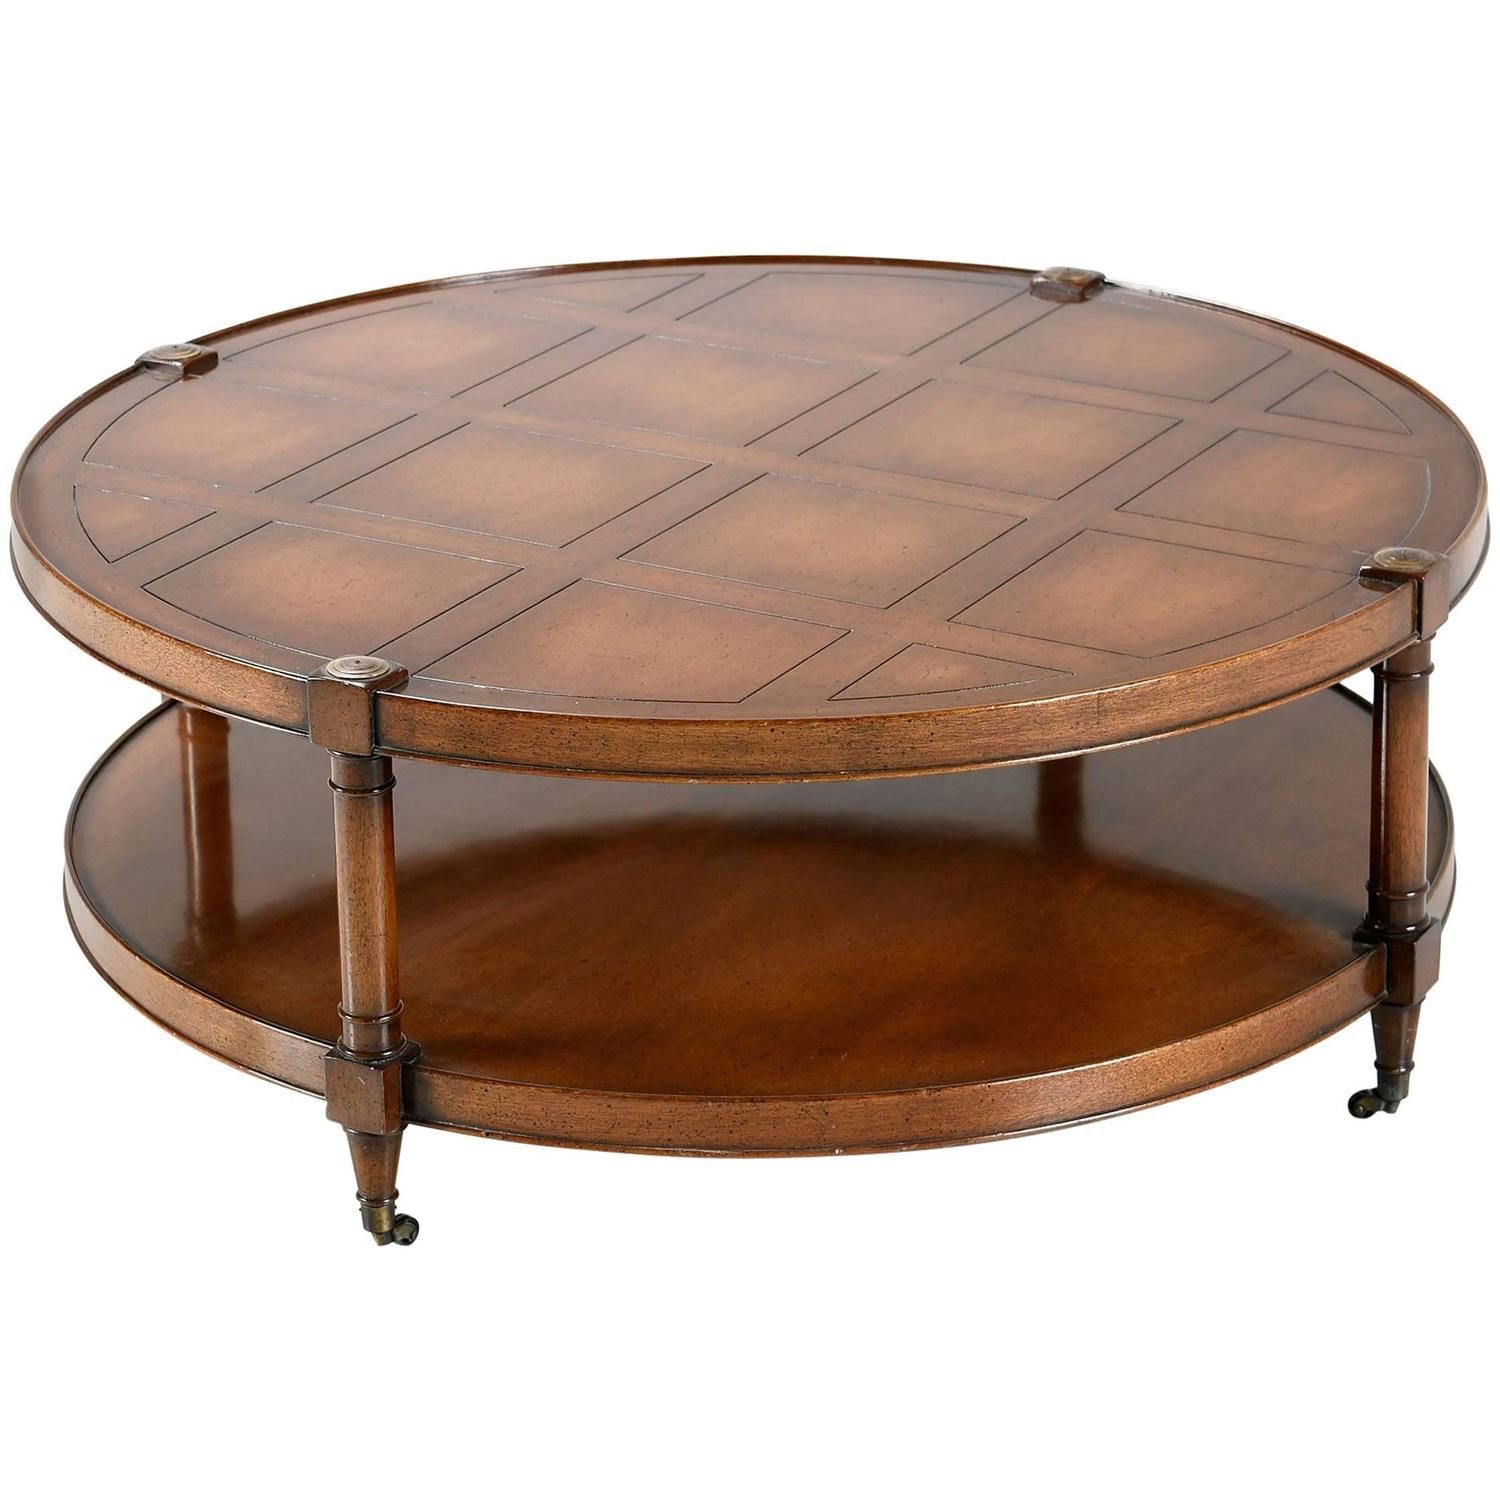 Heritage Mahogany Round Coffee Table On Casters | Coffee Table Vintage Pertaining To American Heritage Round Coffee Tables (View 8 of 20)